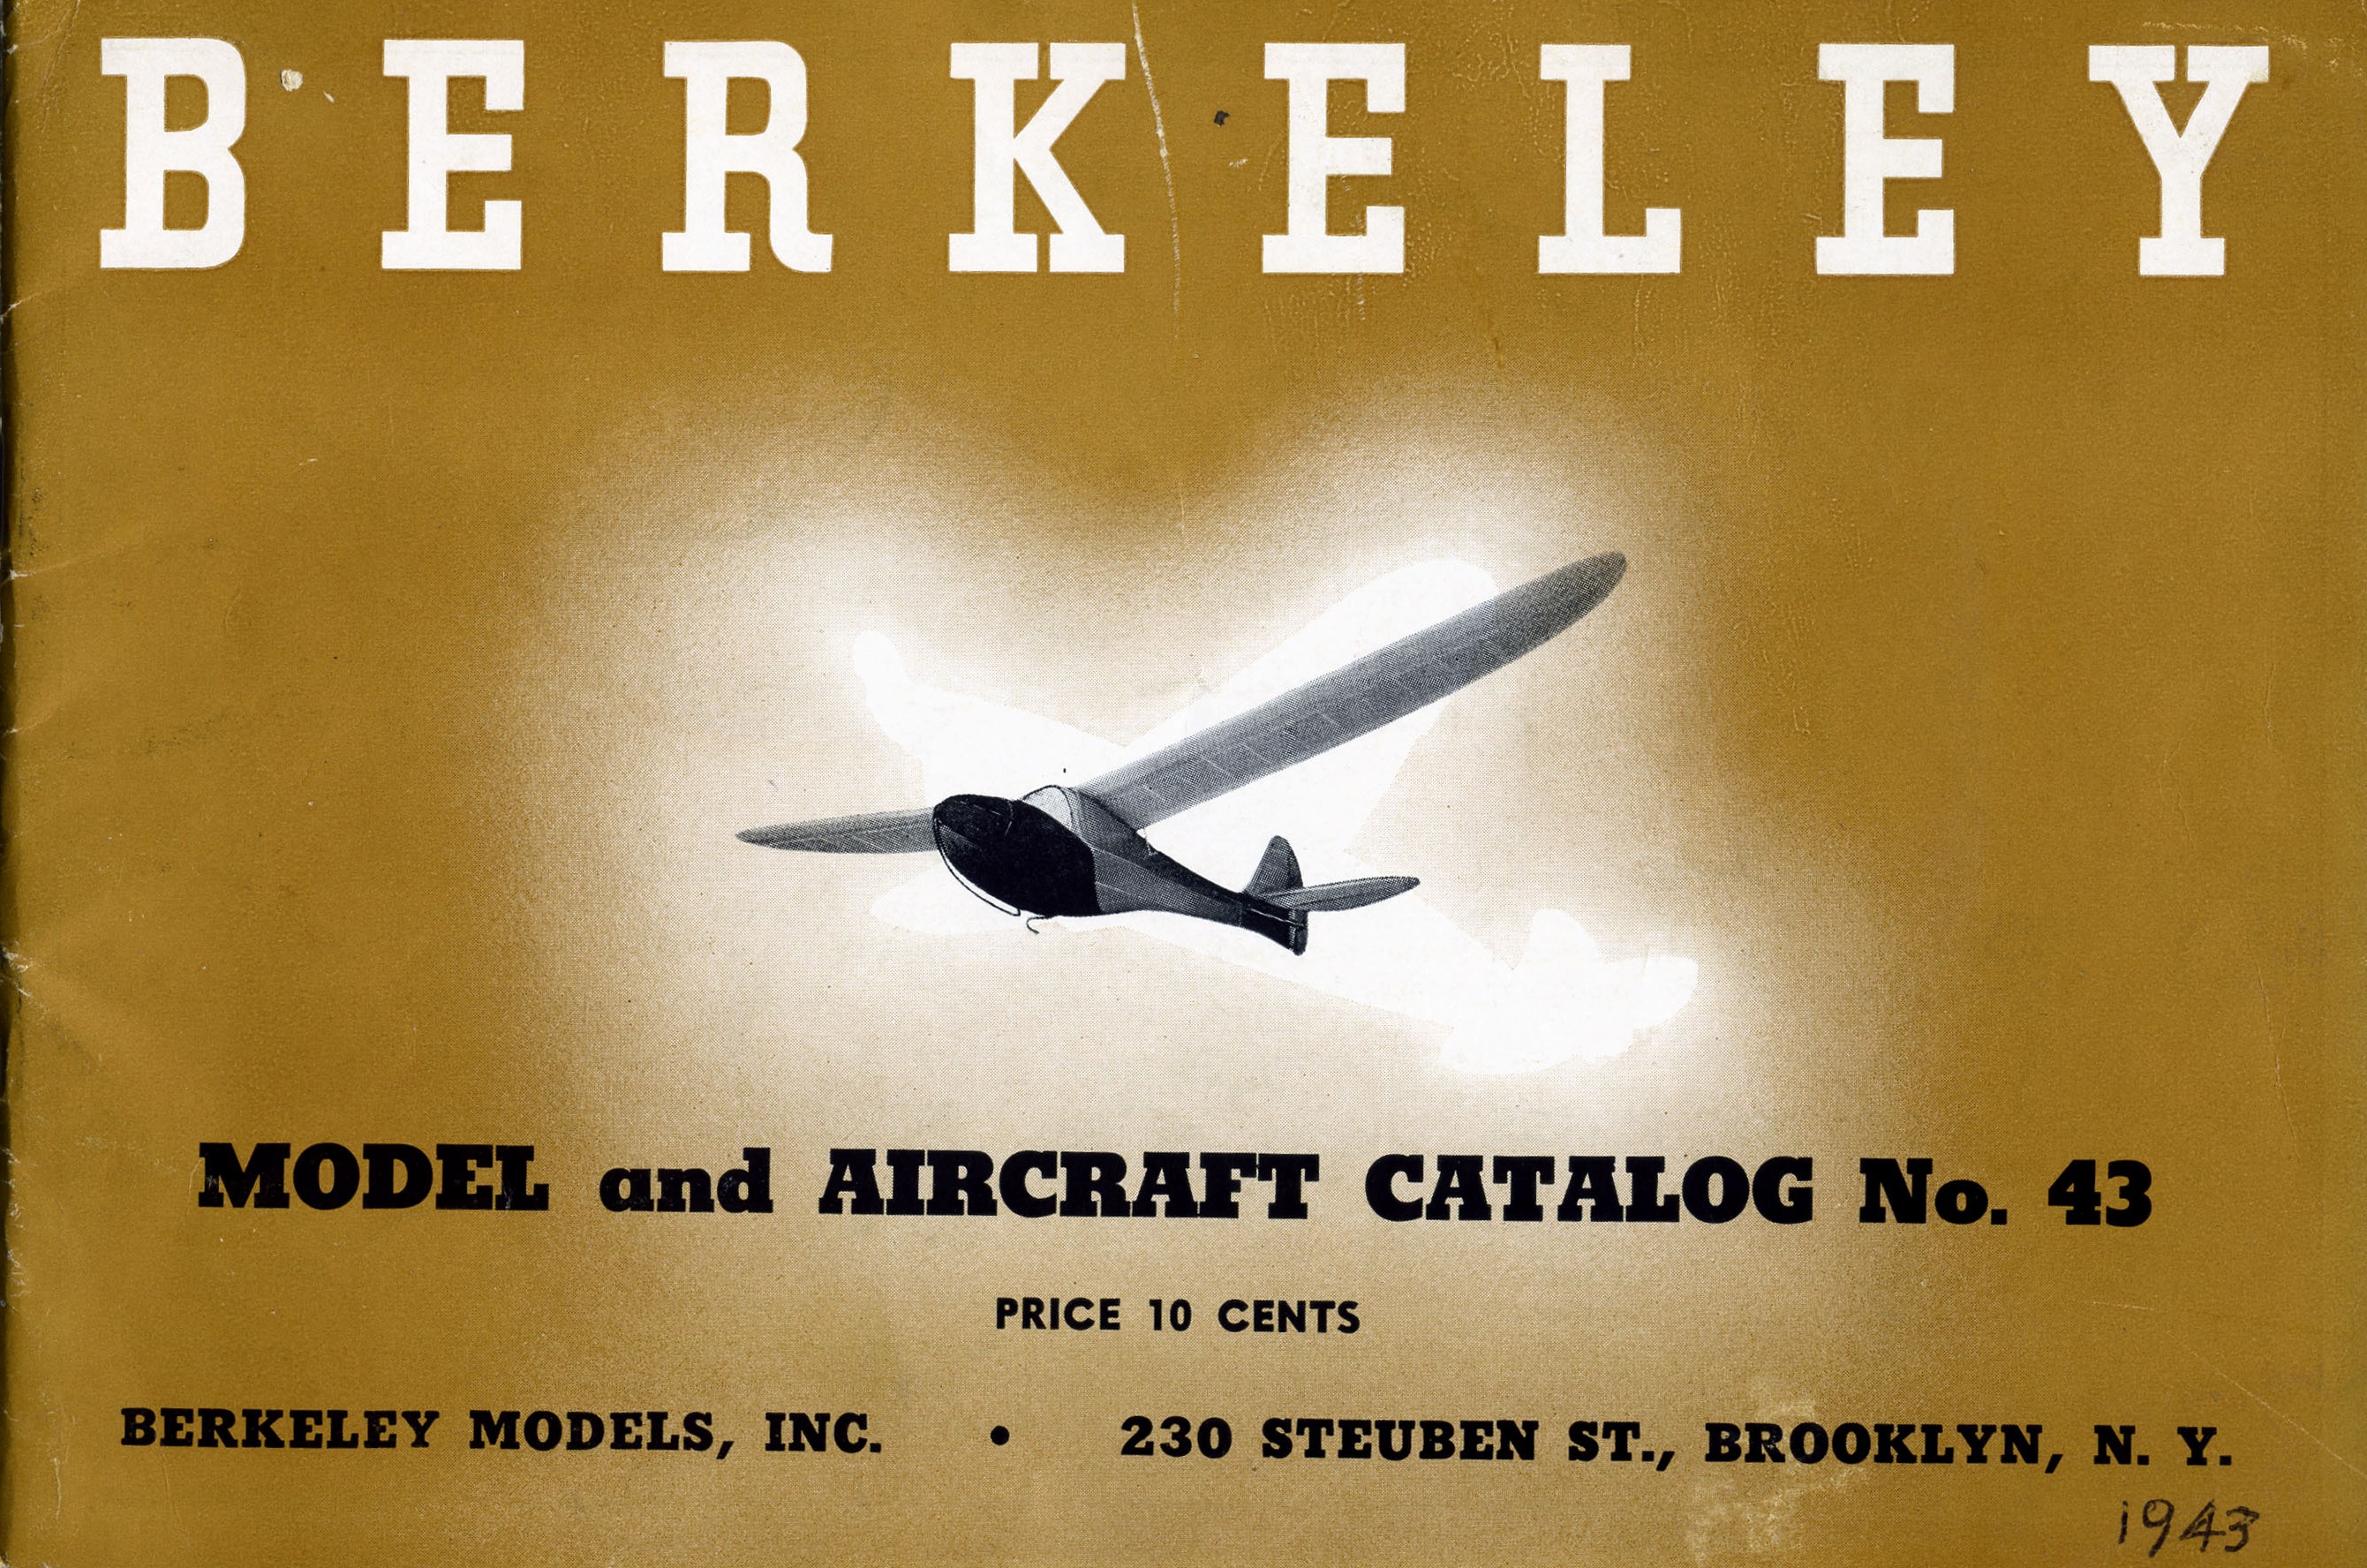 Catalog, Berkeley Models, Inc., 1943, front and page 14. (Source: National Model Aviation Museum Archives, Manufacturers and Companies Collection #0043)